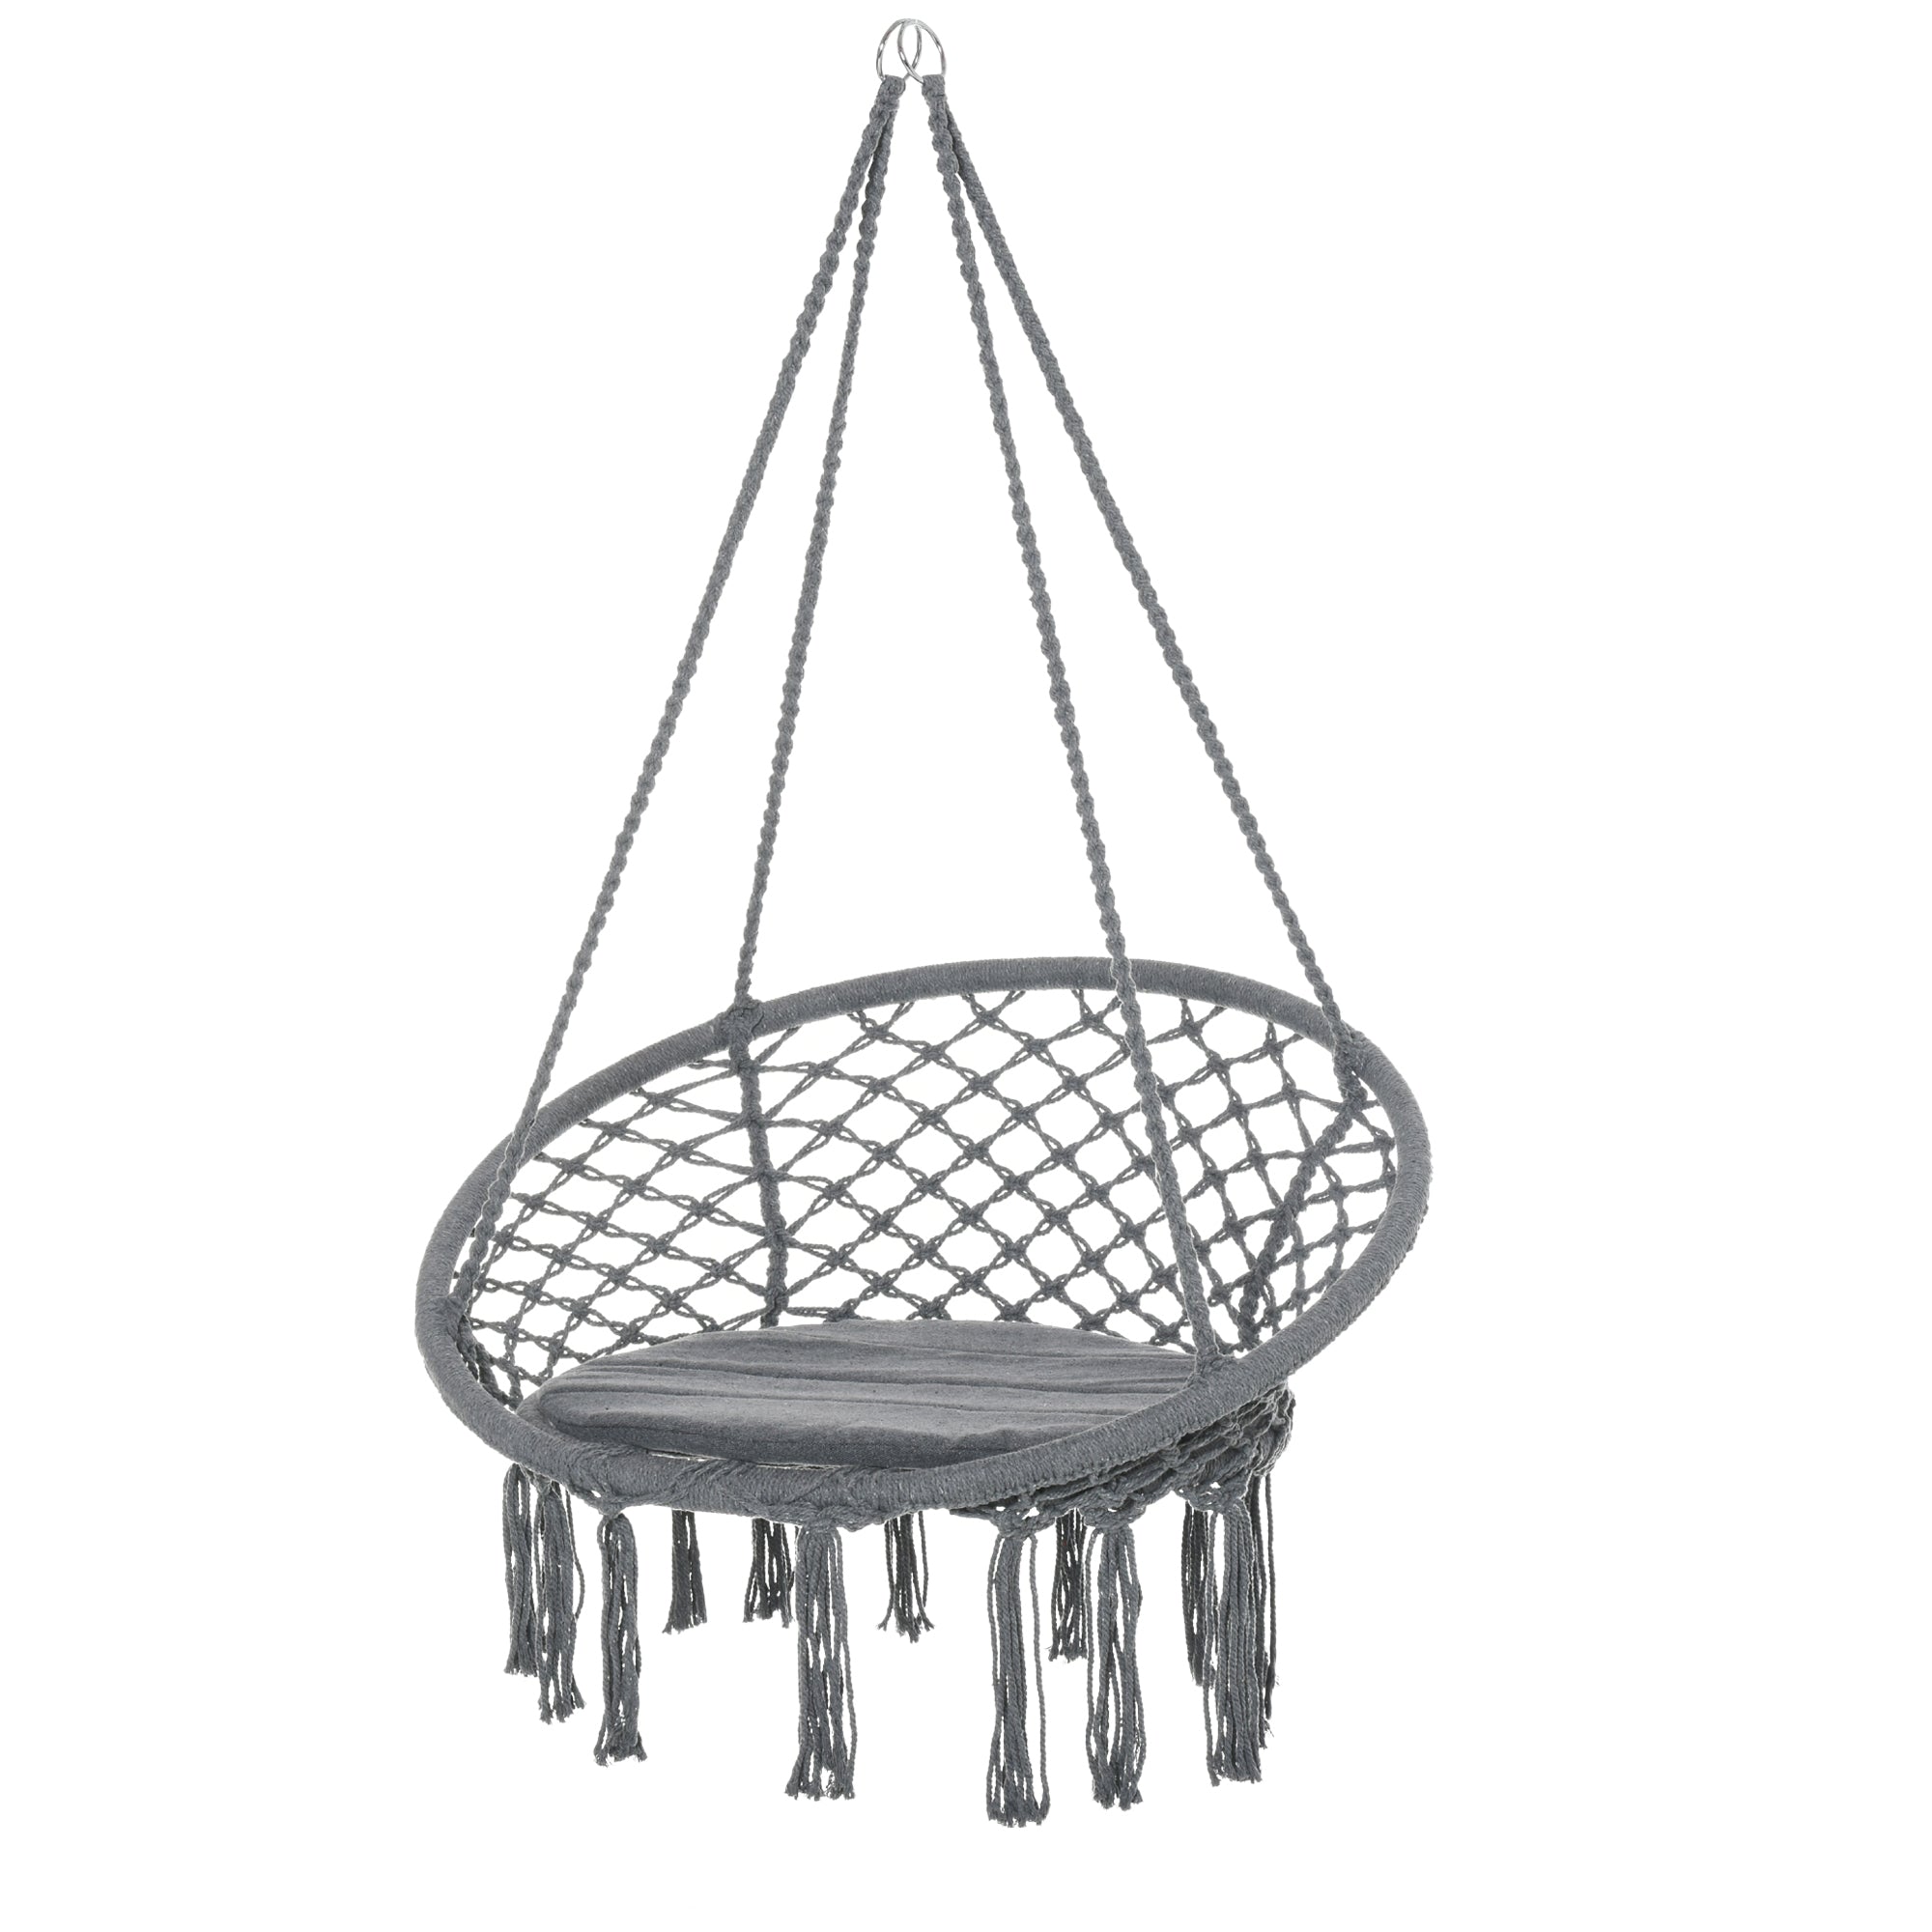 Outsunny Macrame Hanging Chair Swing Hammock for Indoor & Outdoor Use Grey  | TJ Hughes